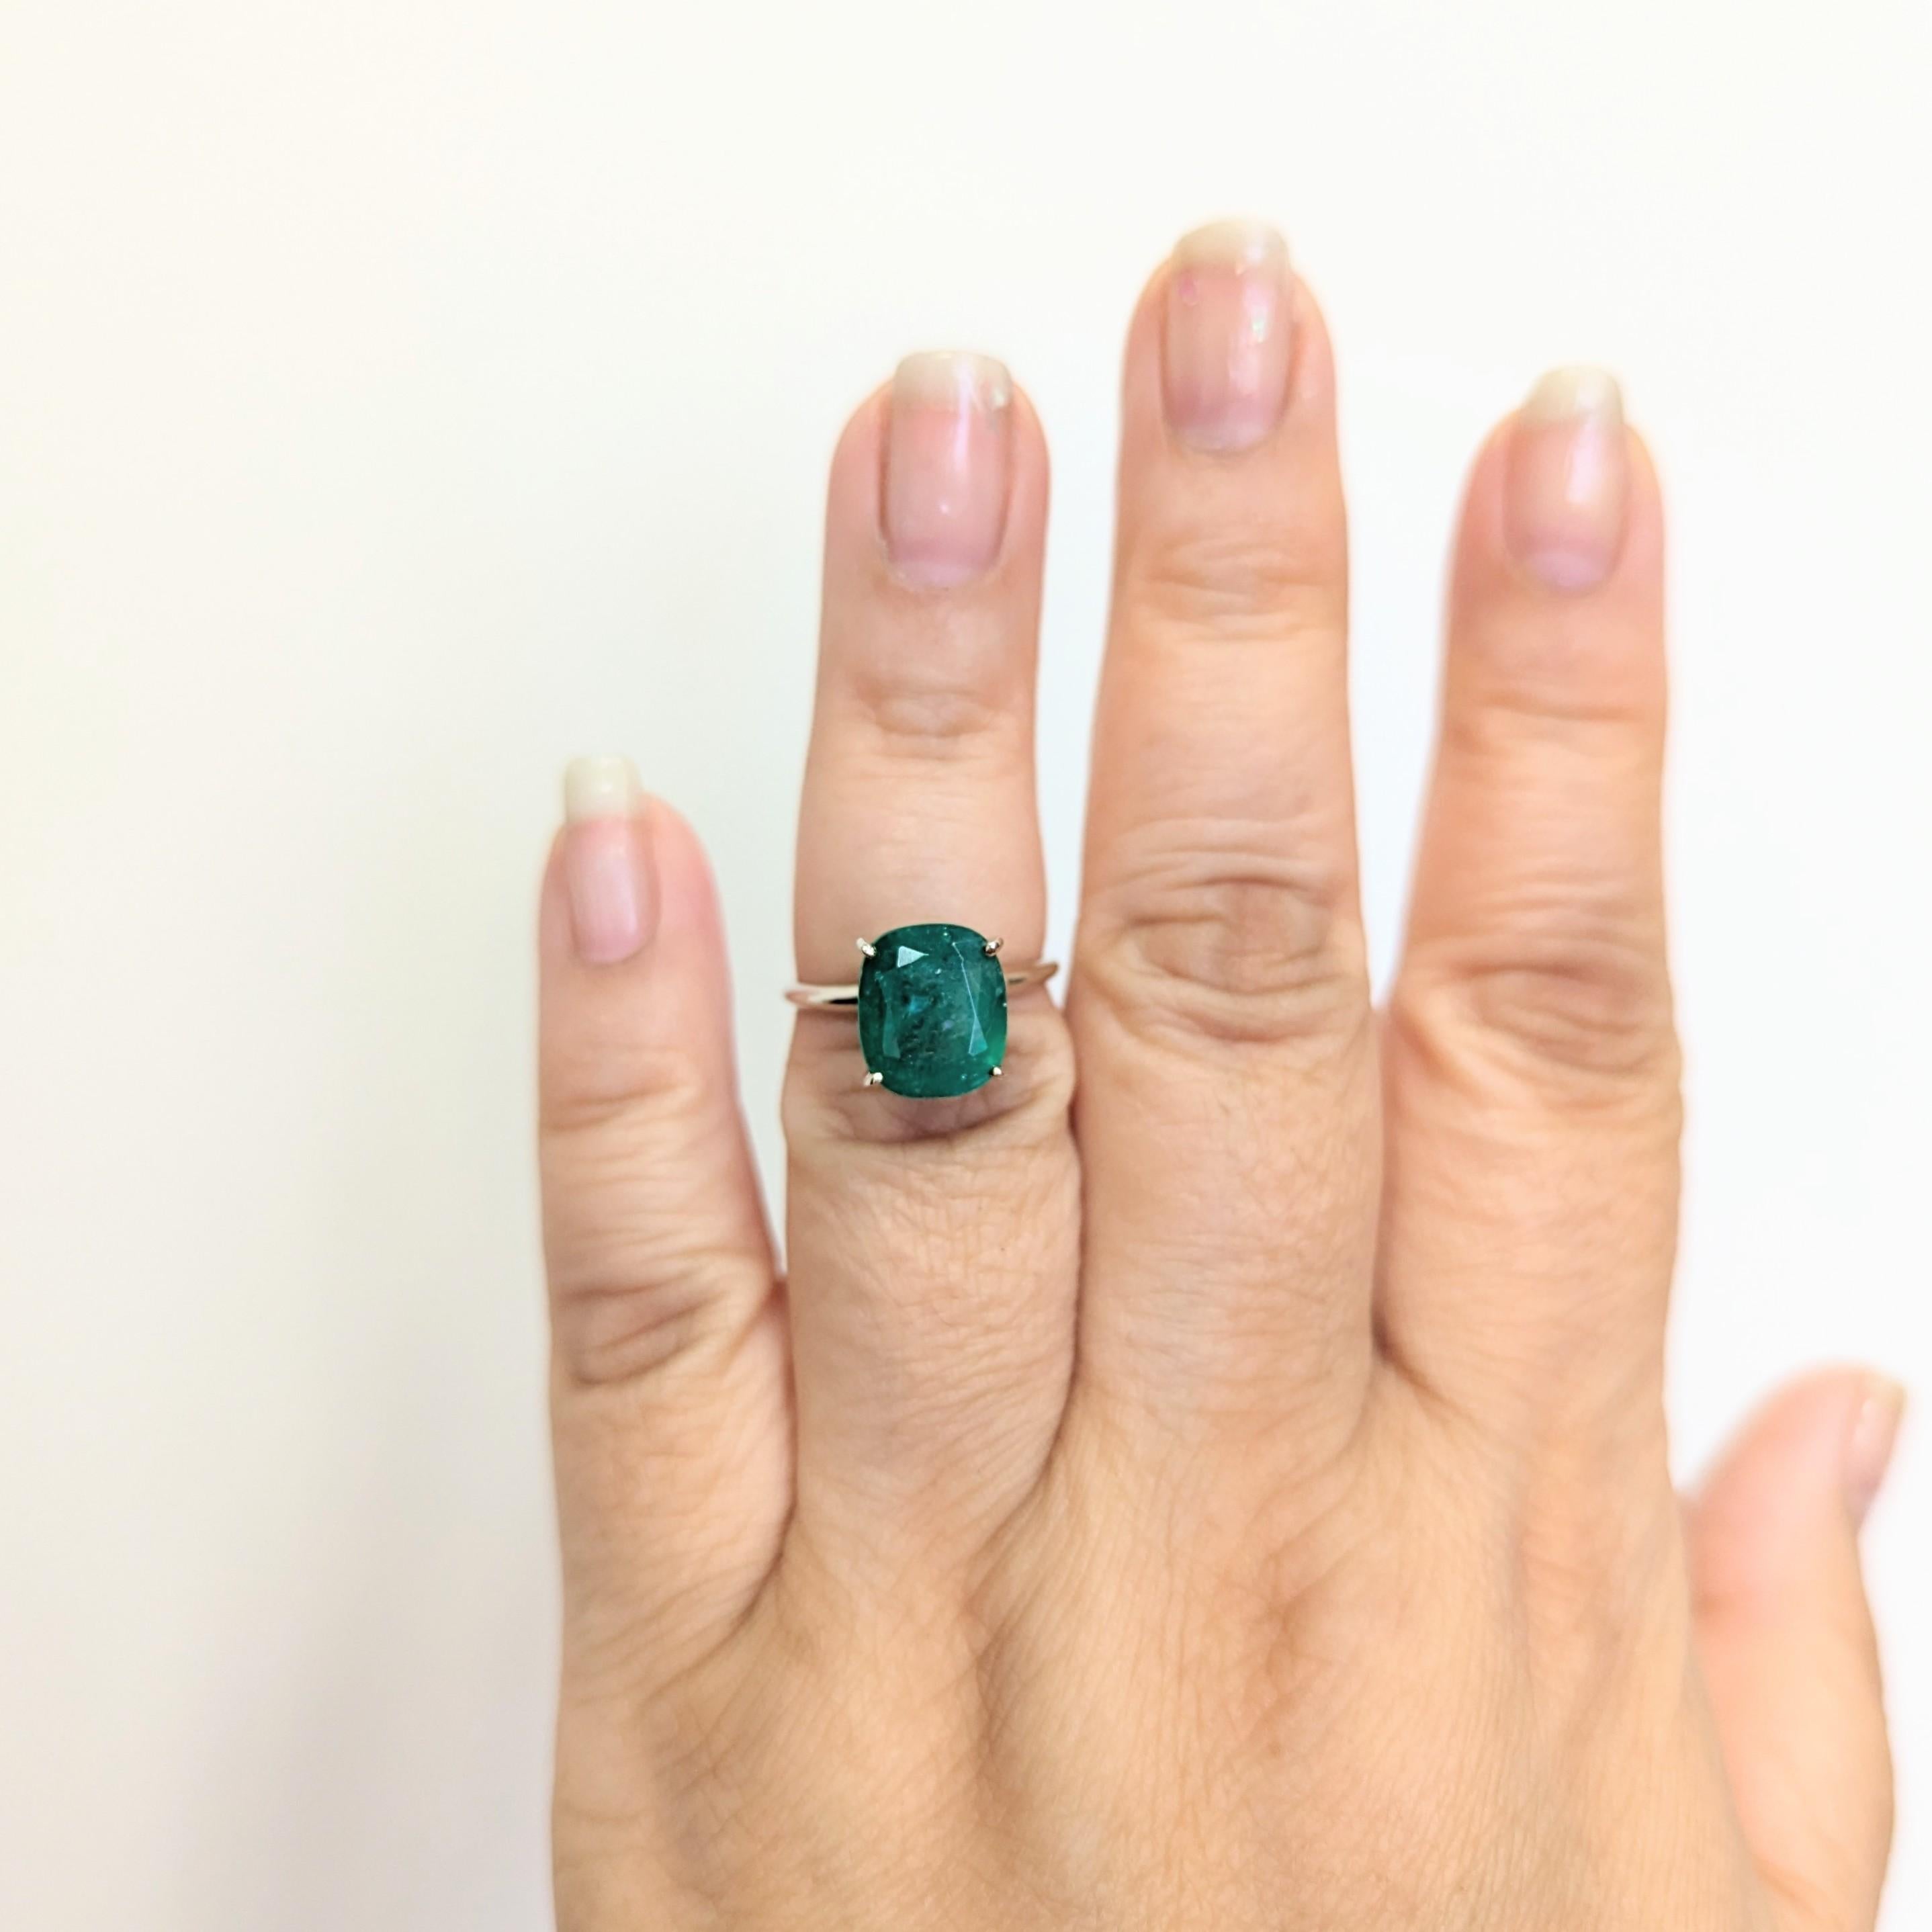 Beautiful 5.09 ct. emerald cushion in a handmade 14k white gold mounting.  Ring size 6.5.